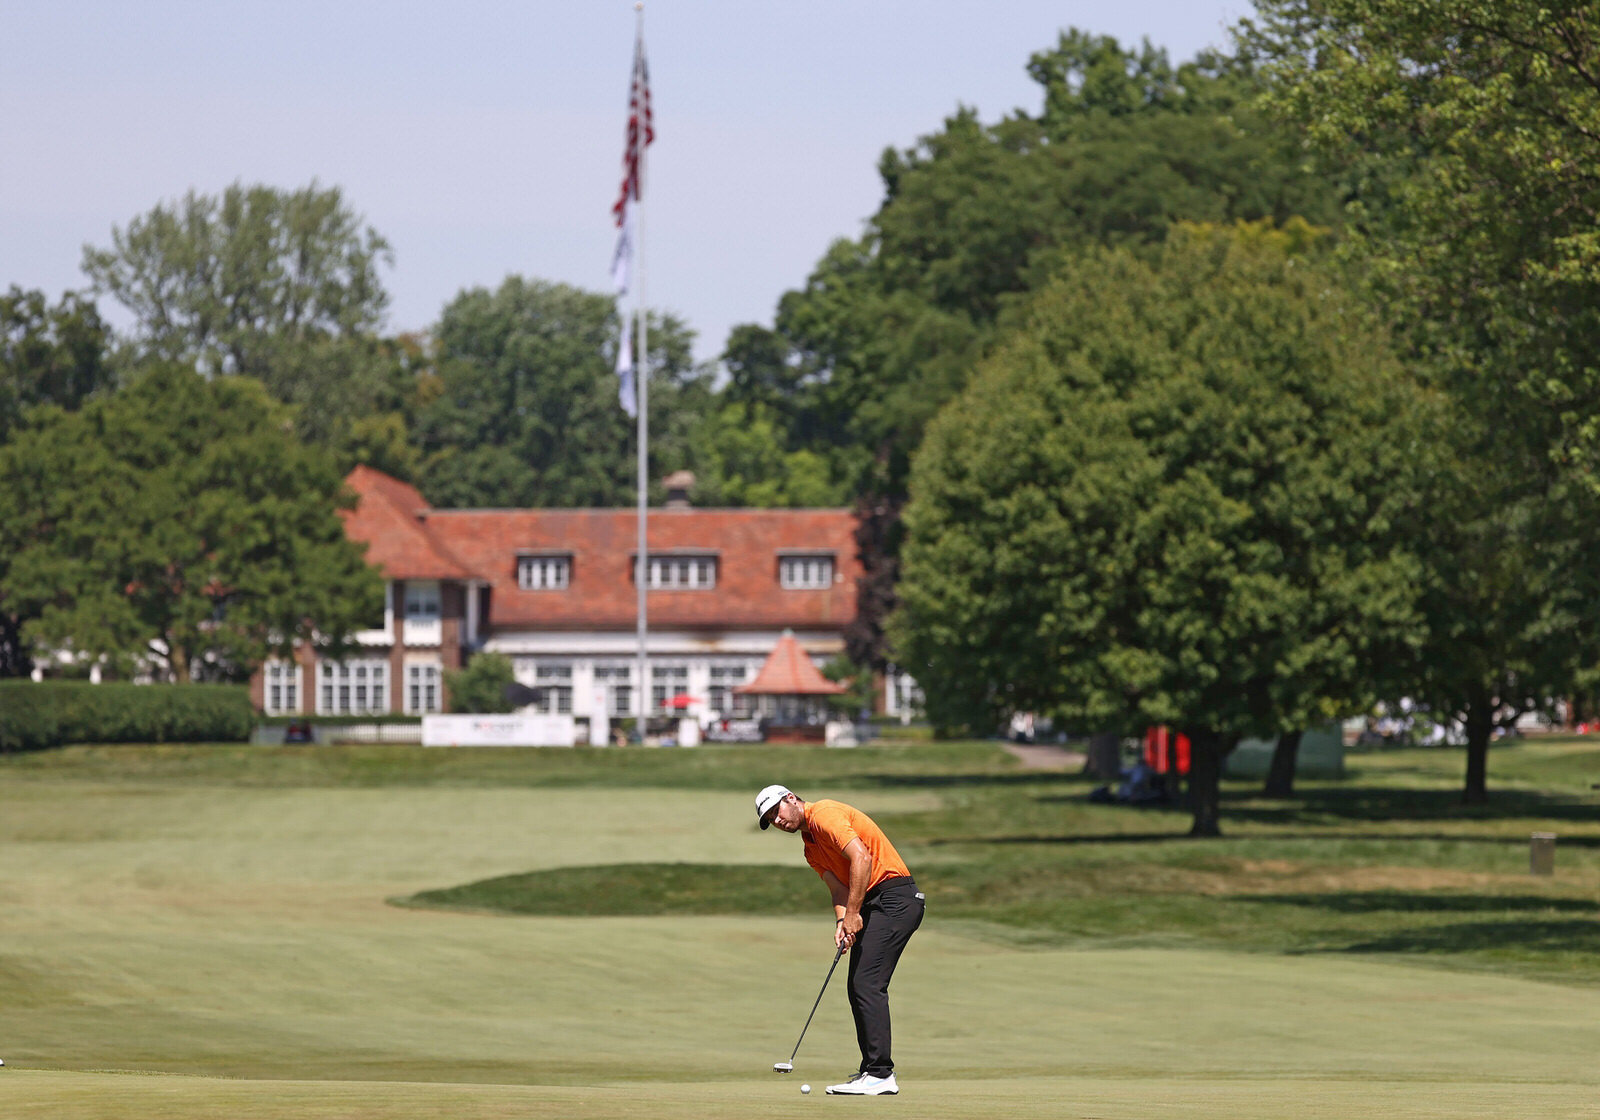  DETROIT, MICHIGAN - JULY 05: Matthew Wolff of the United States putts on the third green during the final round of the Rocket Mortgage Classic on July 05, 2020 at the Detroit Golf Club in Detroit, Michigan. (Photo by Gregory Shamus/Getty Images) 